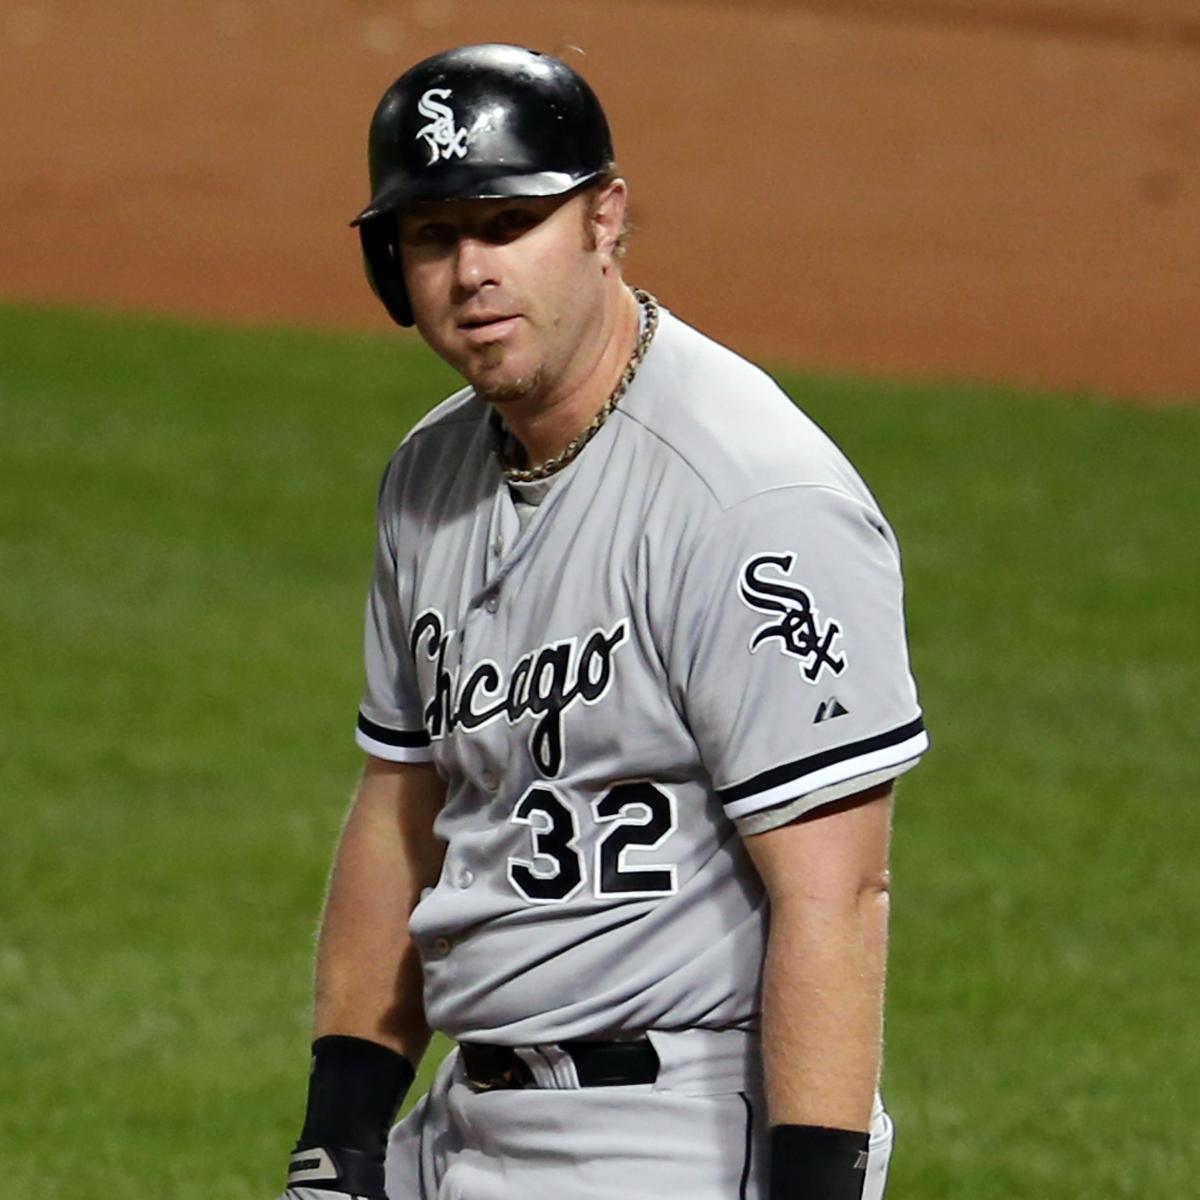 Adam Dunn of Chicago White Sox mulls invite to attend Academy Awards Sunday  - ESPN